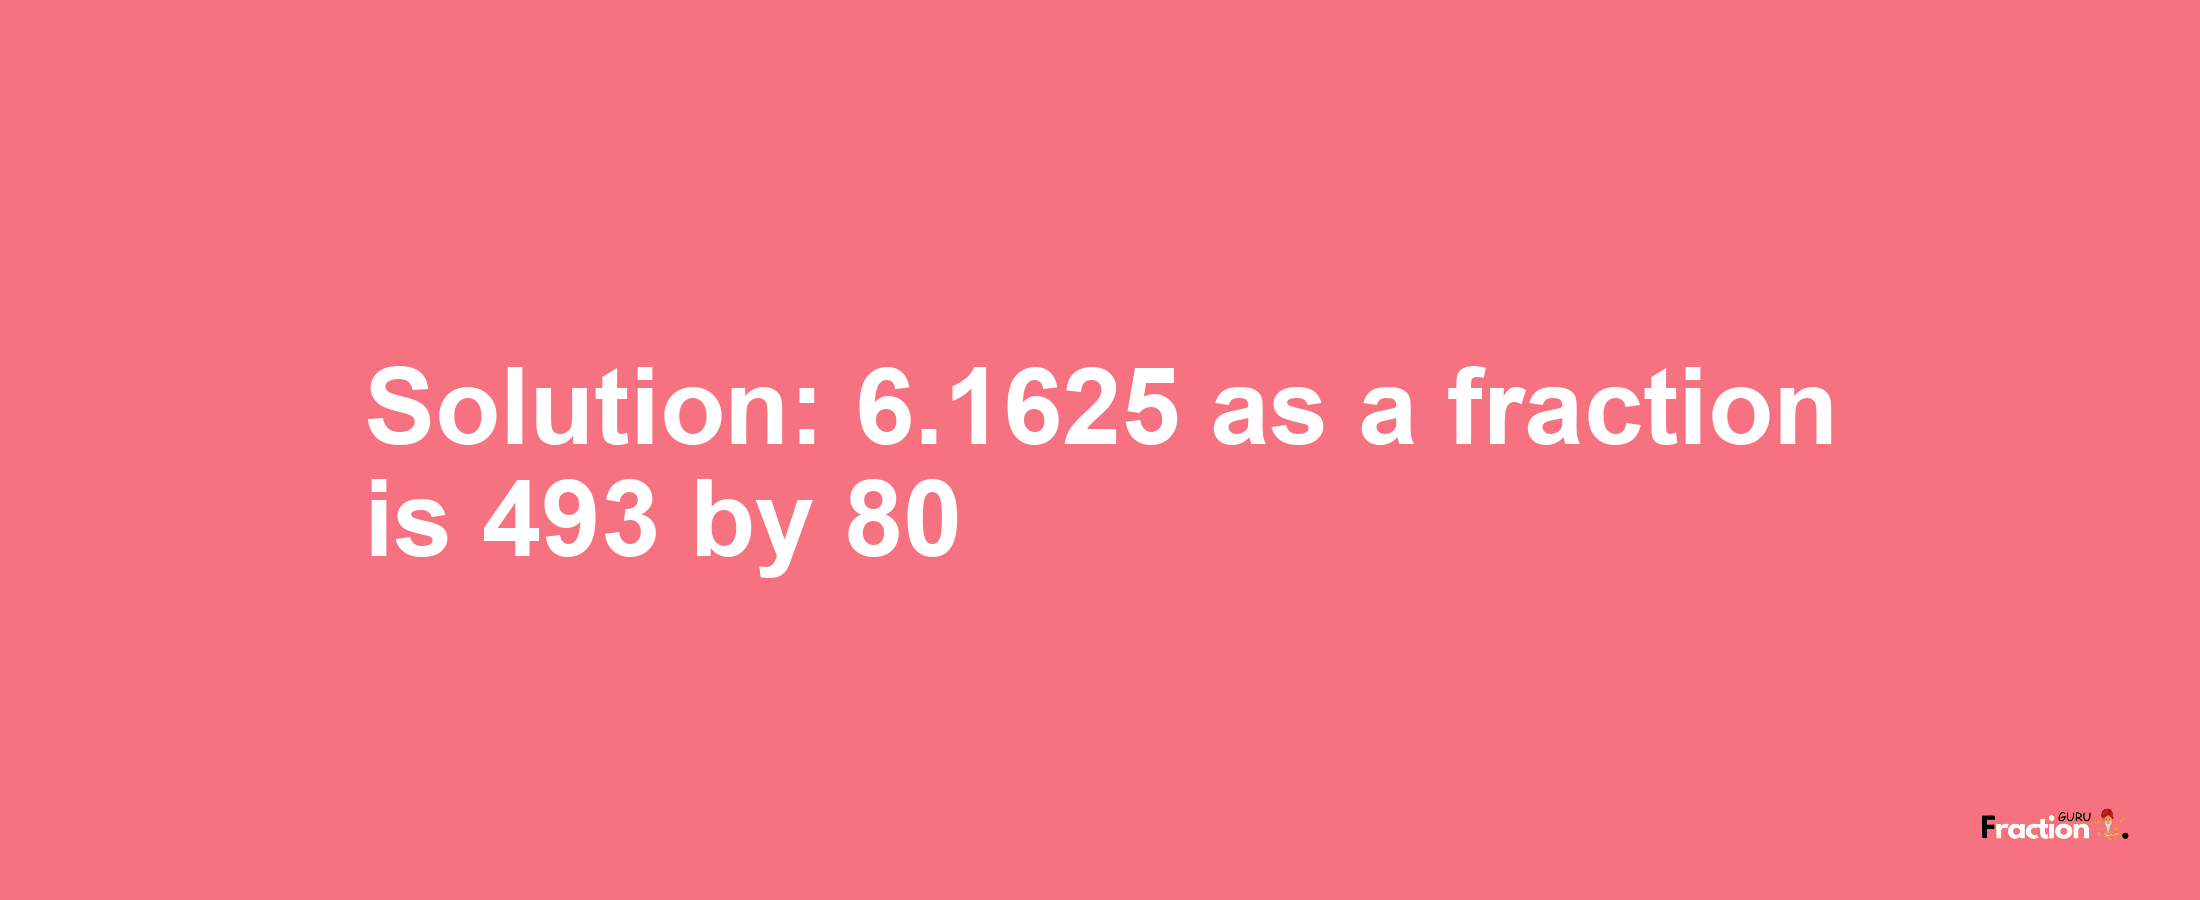 Solution:6.1625 as a fraction is 493/80